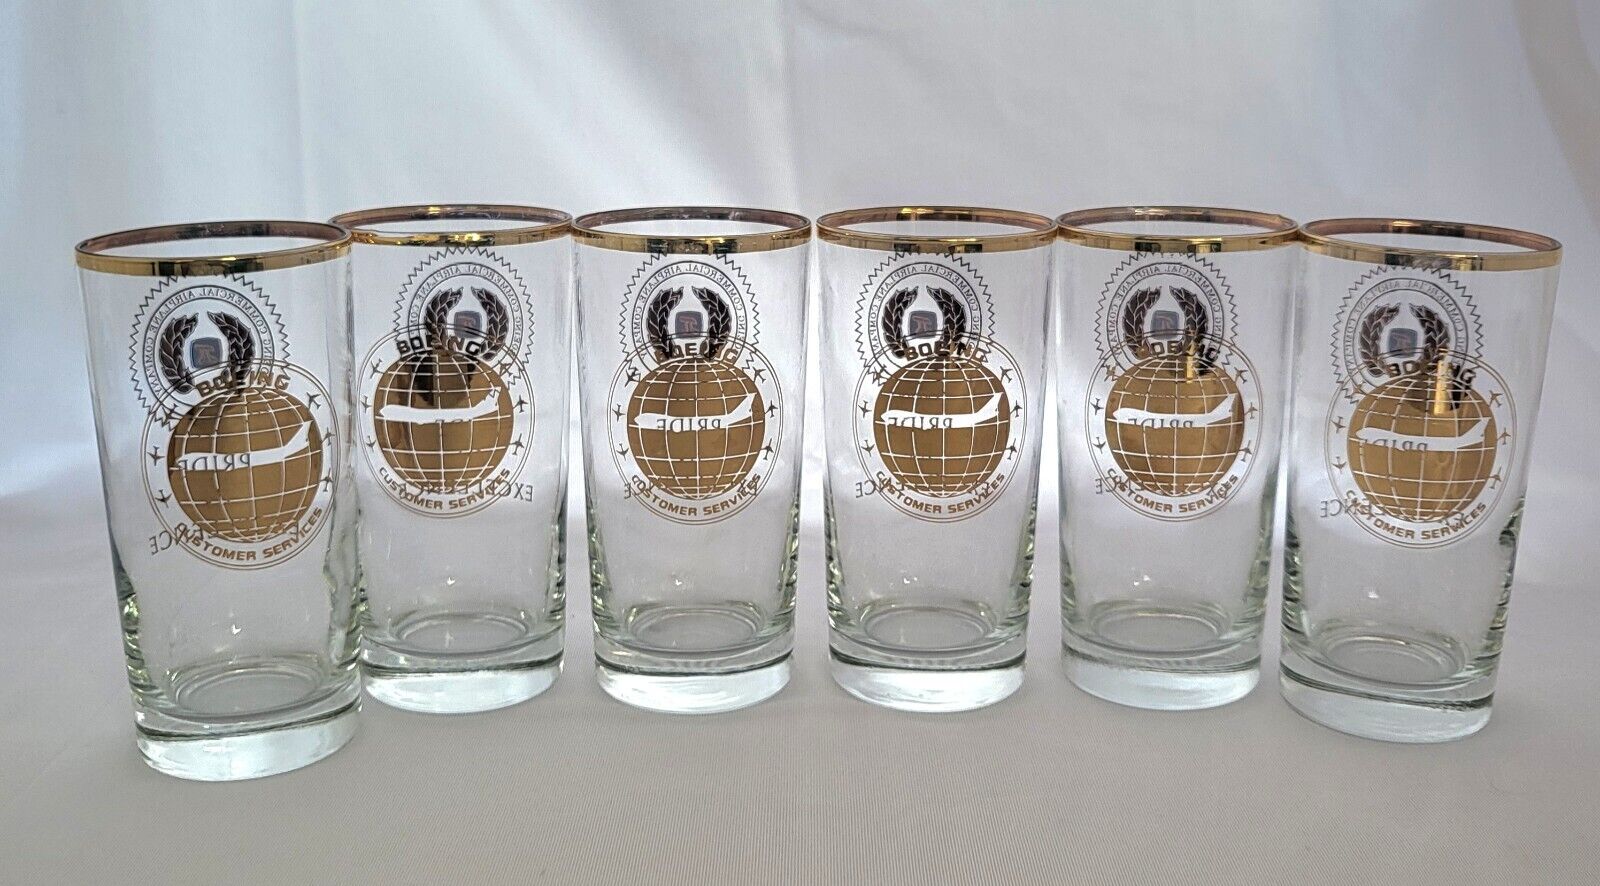 6 Boeing Drinking Glasses Pride in Excellence Gold with Rim